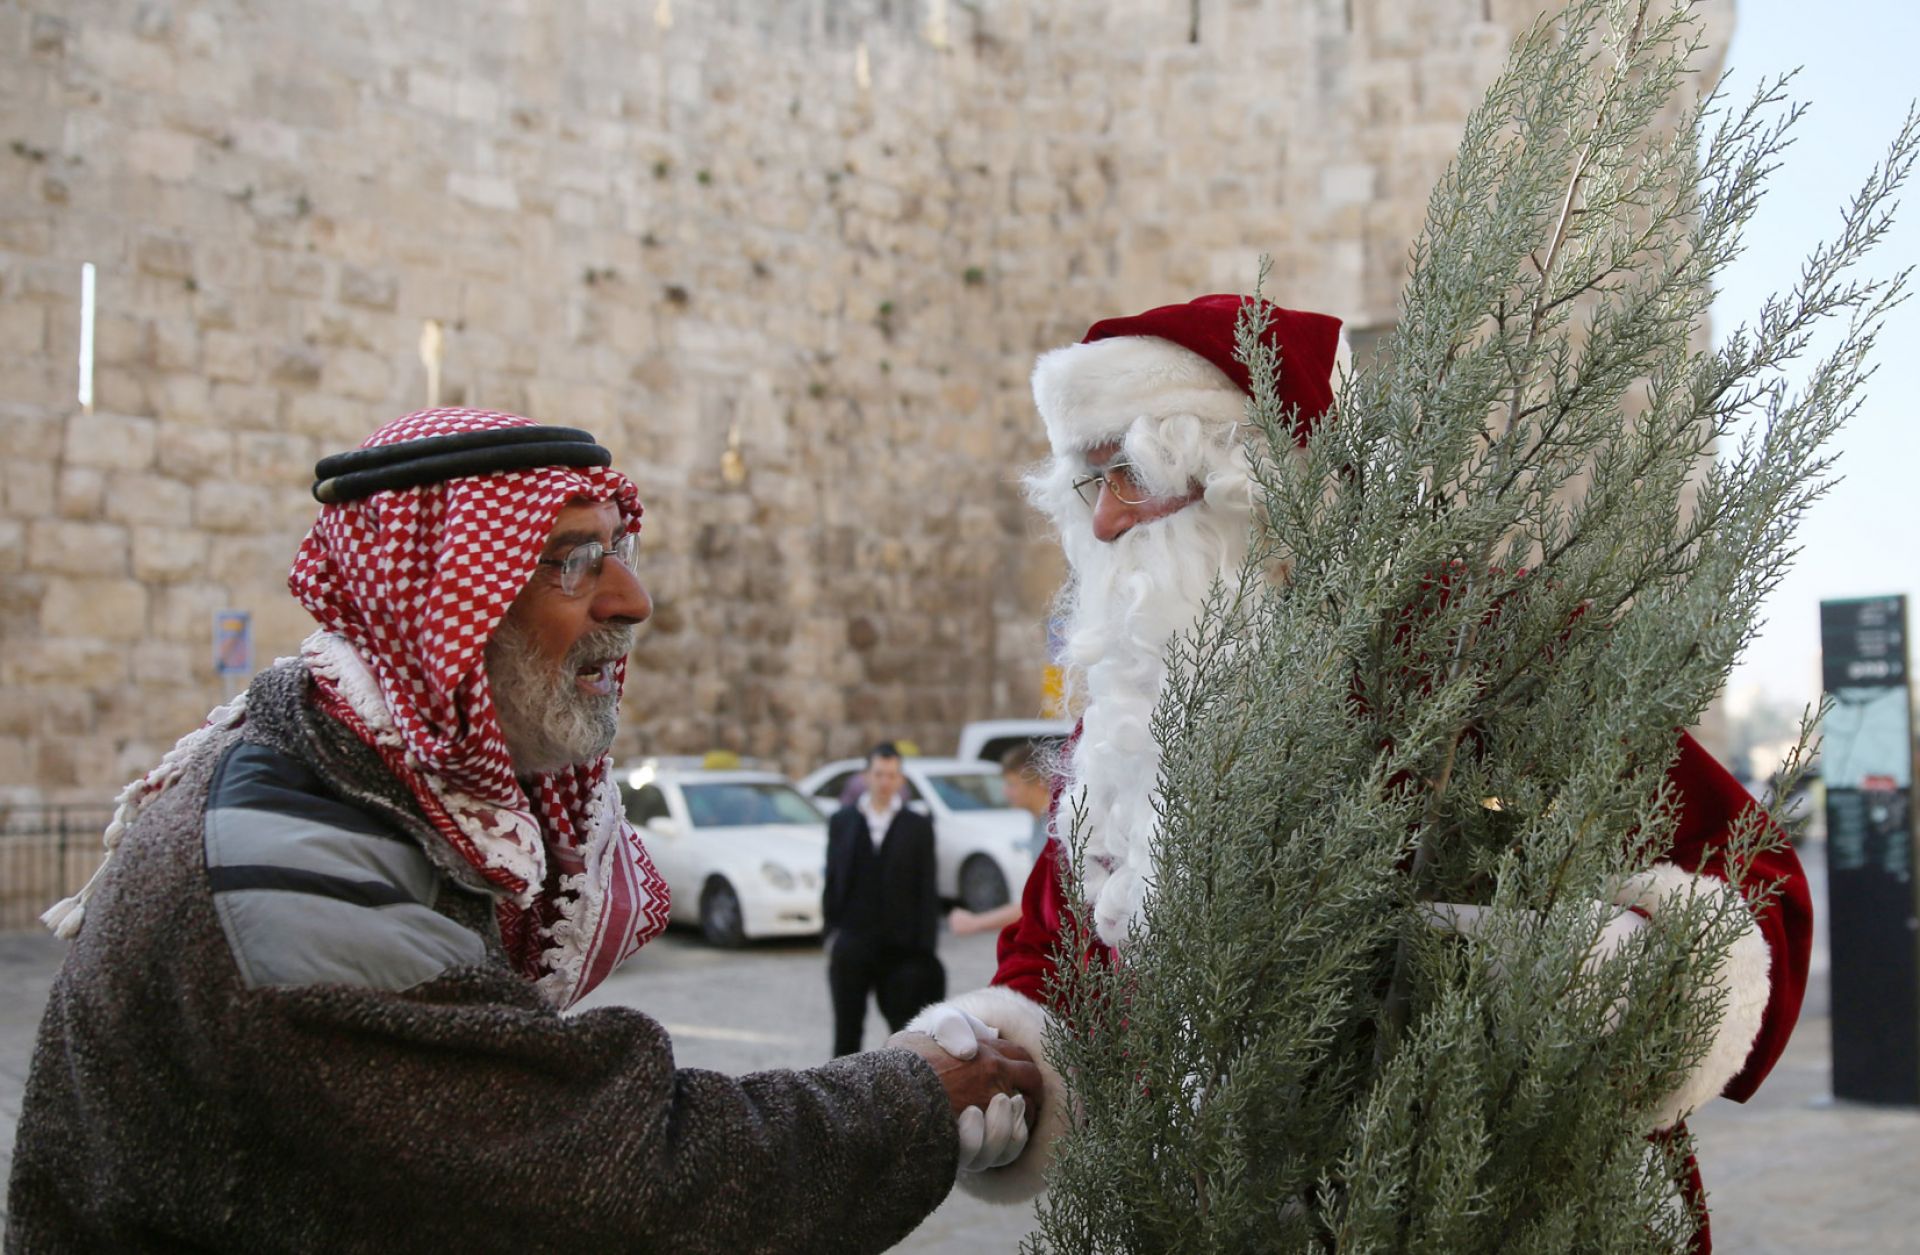 Christmas in the Middle East